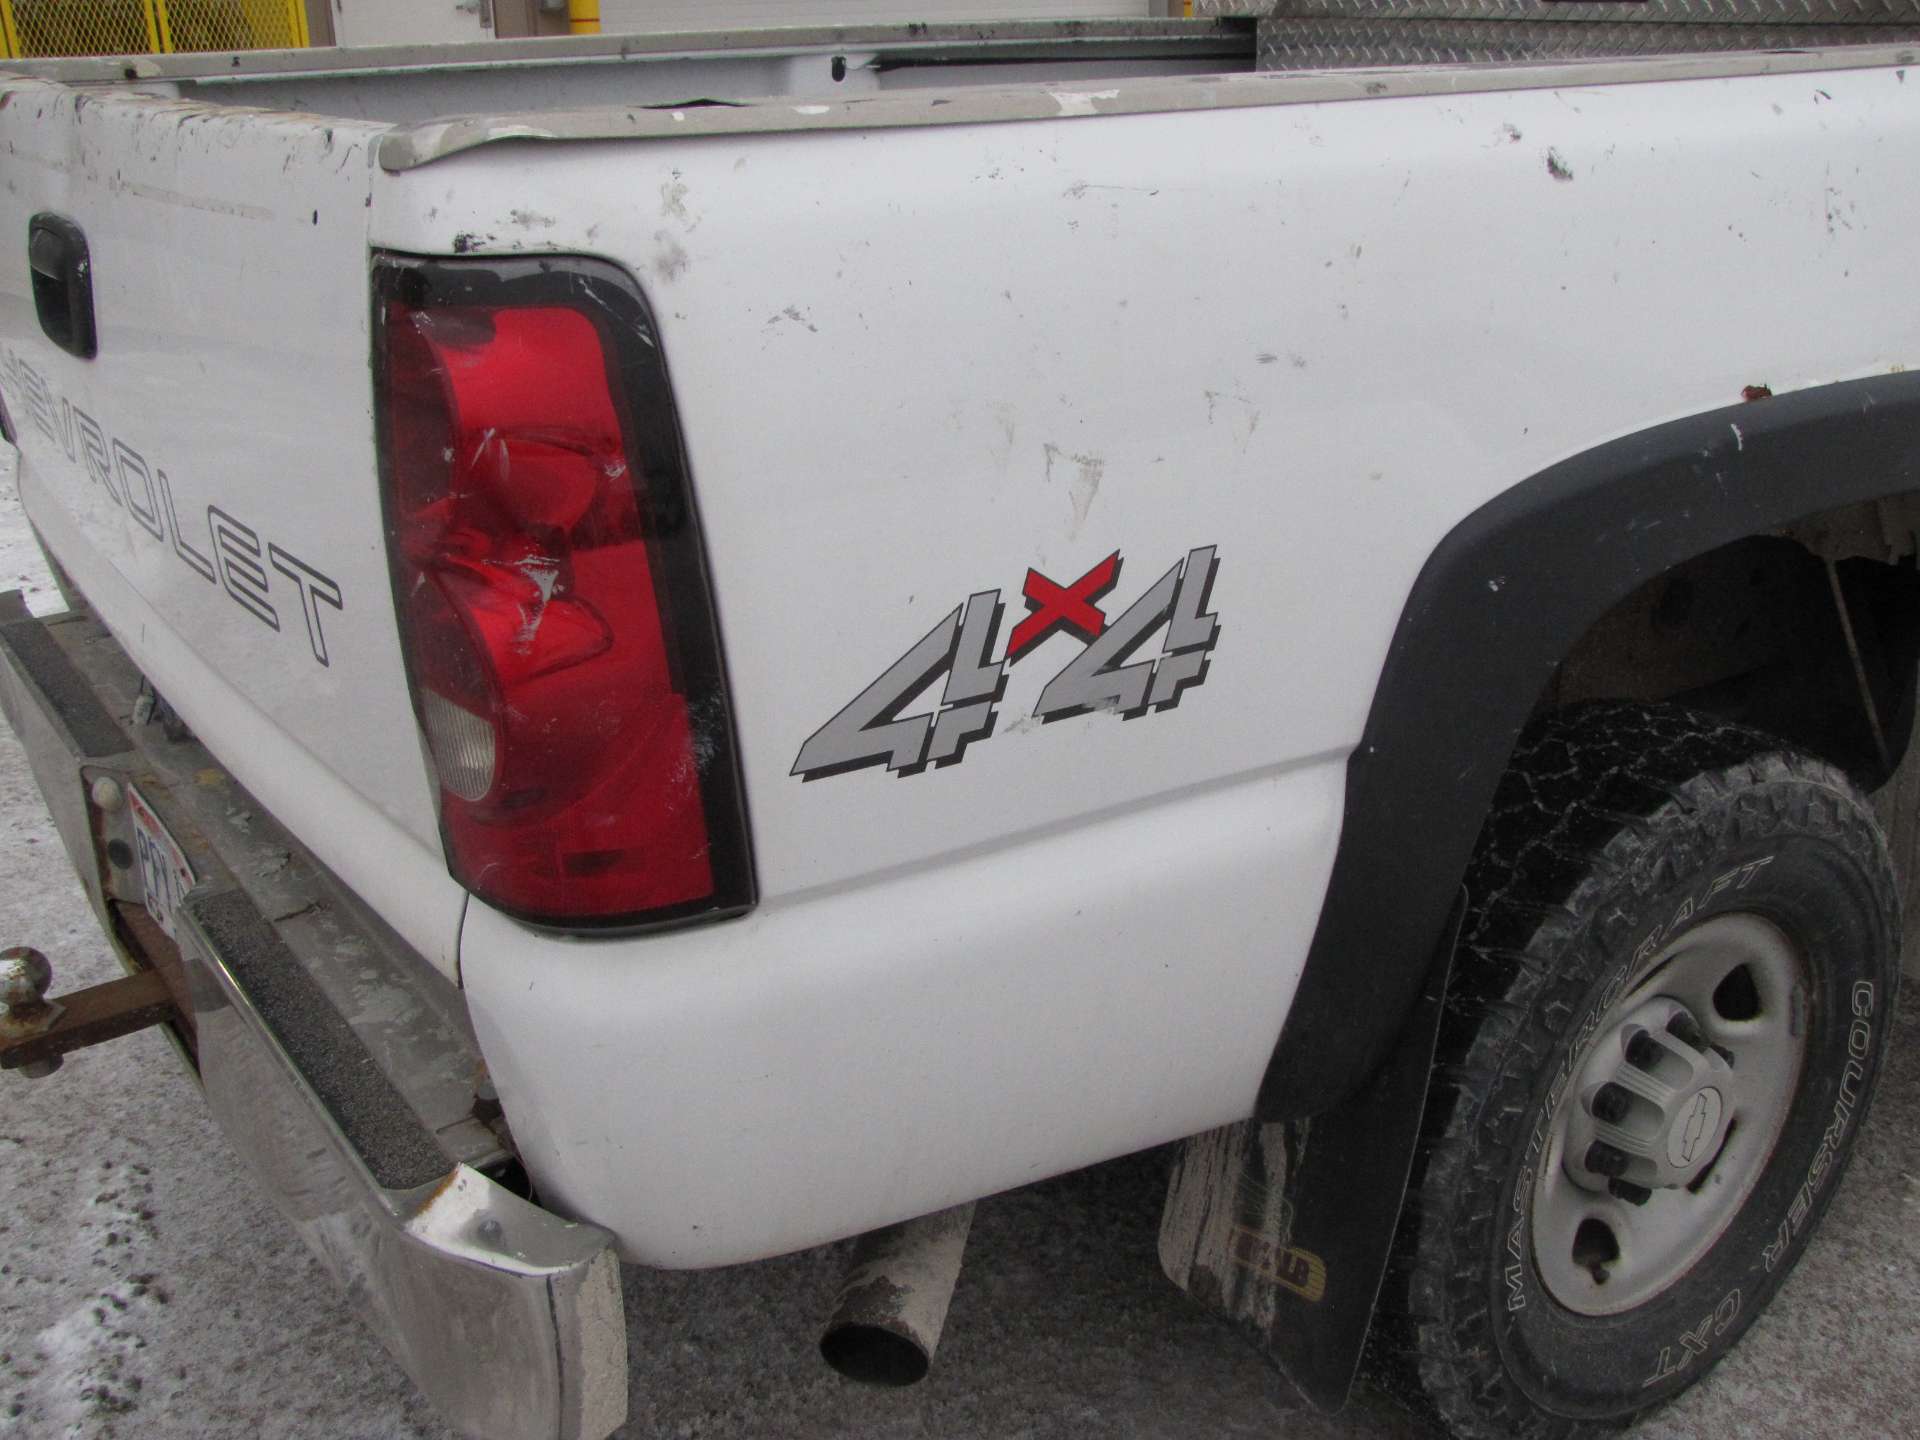 2006 Chevy 2500 HD pickup truck - Image 37 of 63